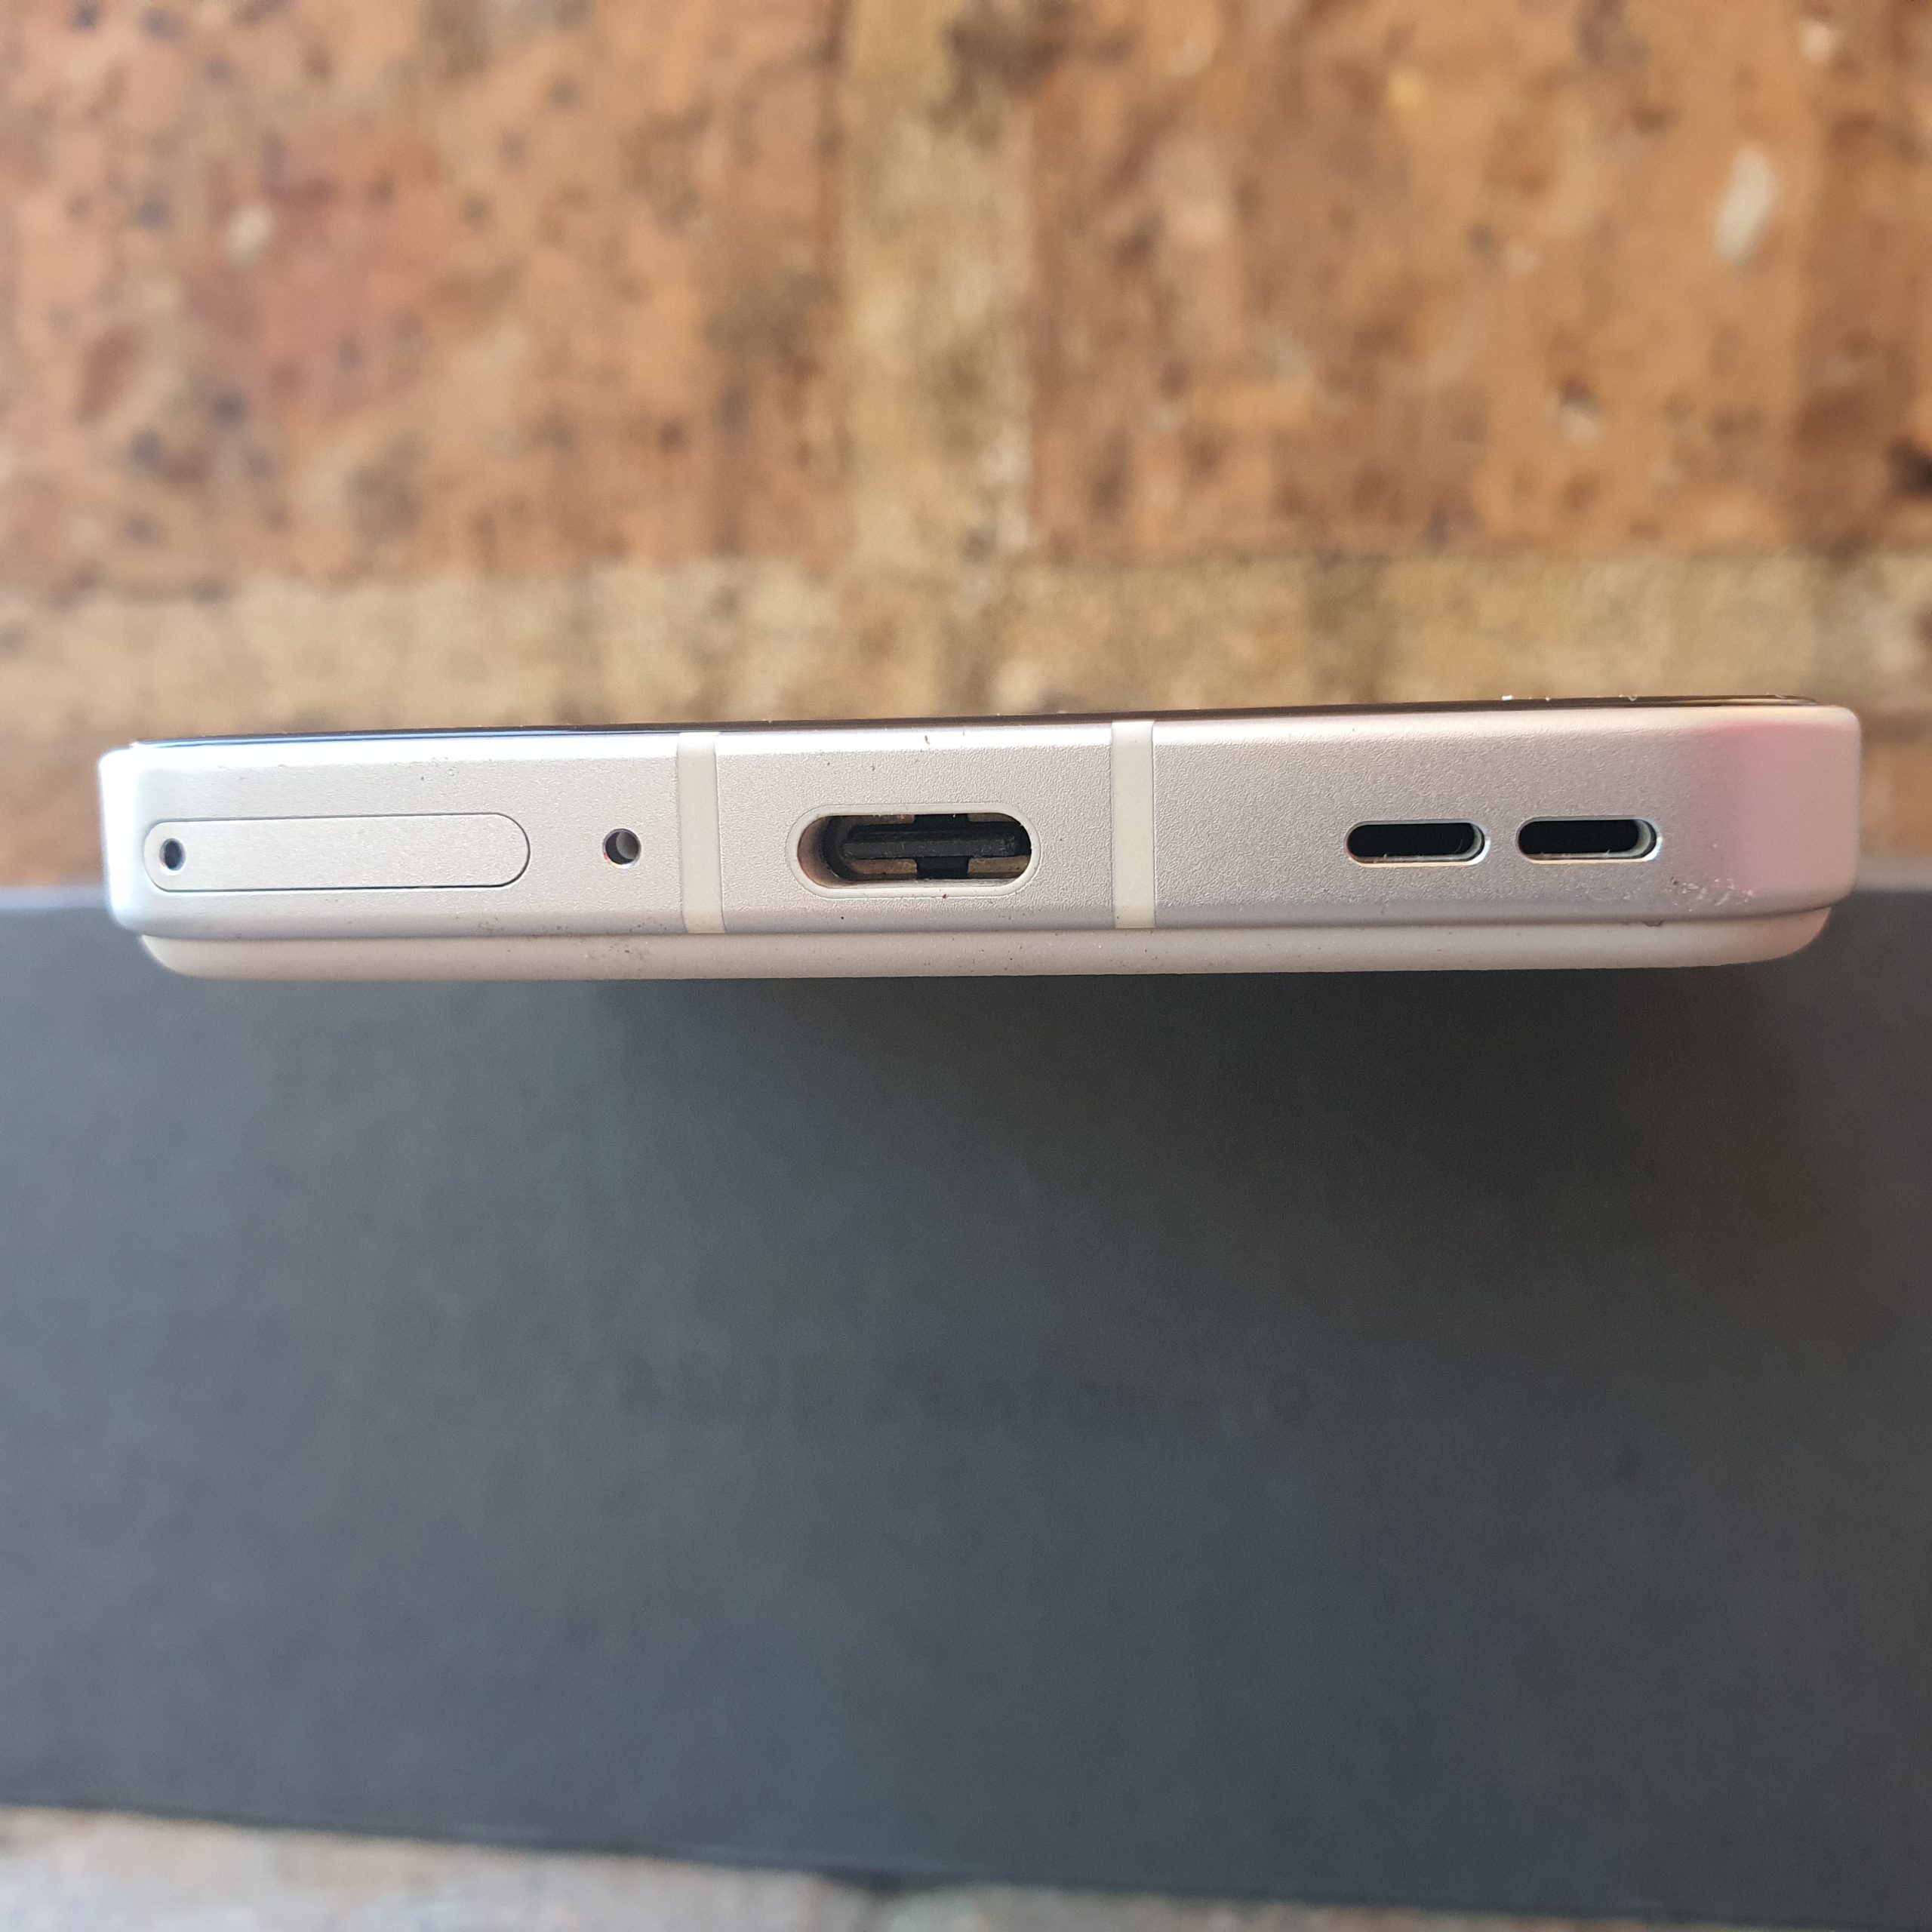 Dual SIM card port (left hand side), USB-C port (centre) and speaker grill (right hand side) - bottom